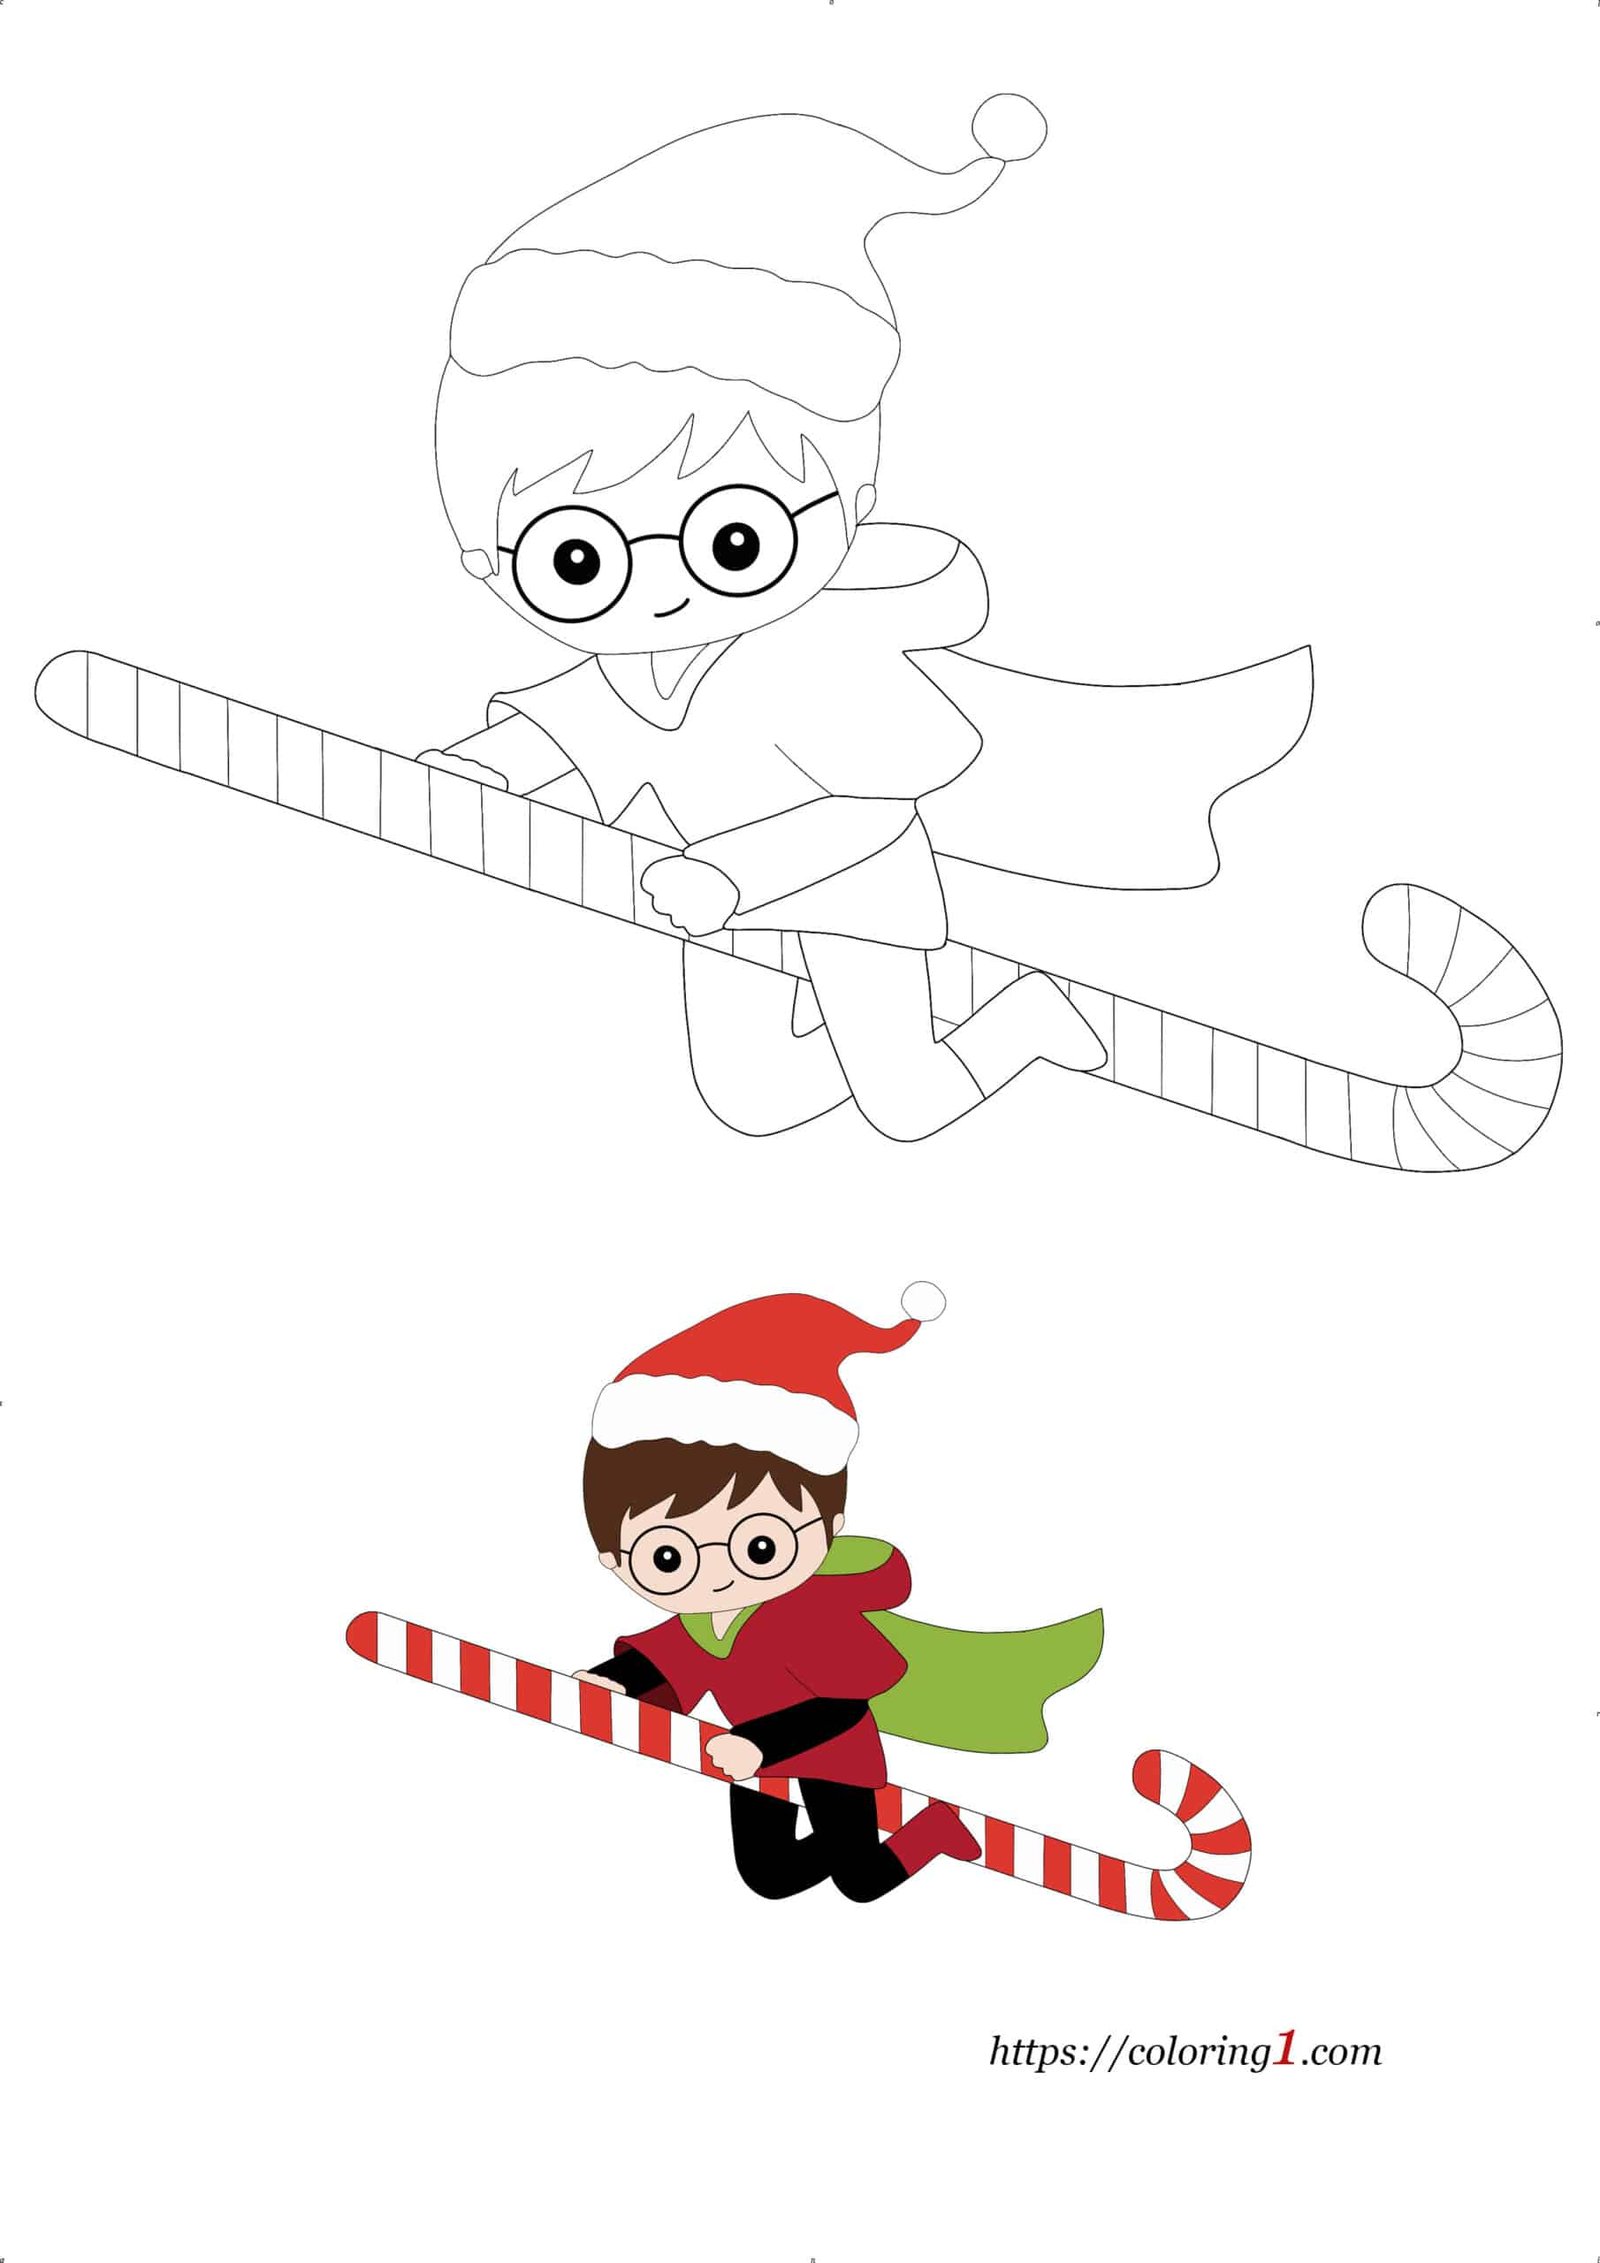 Harry Potter Christmas coloring page to print for kids